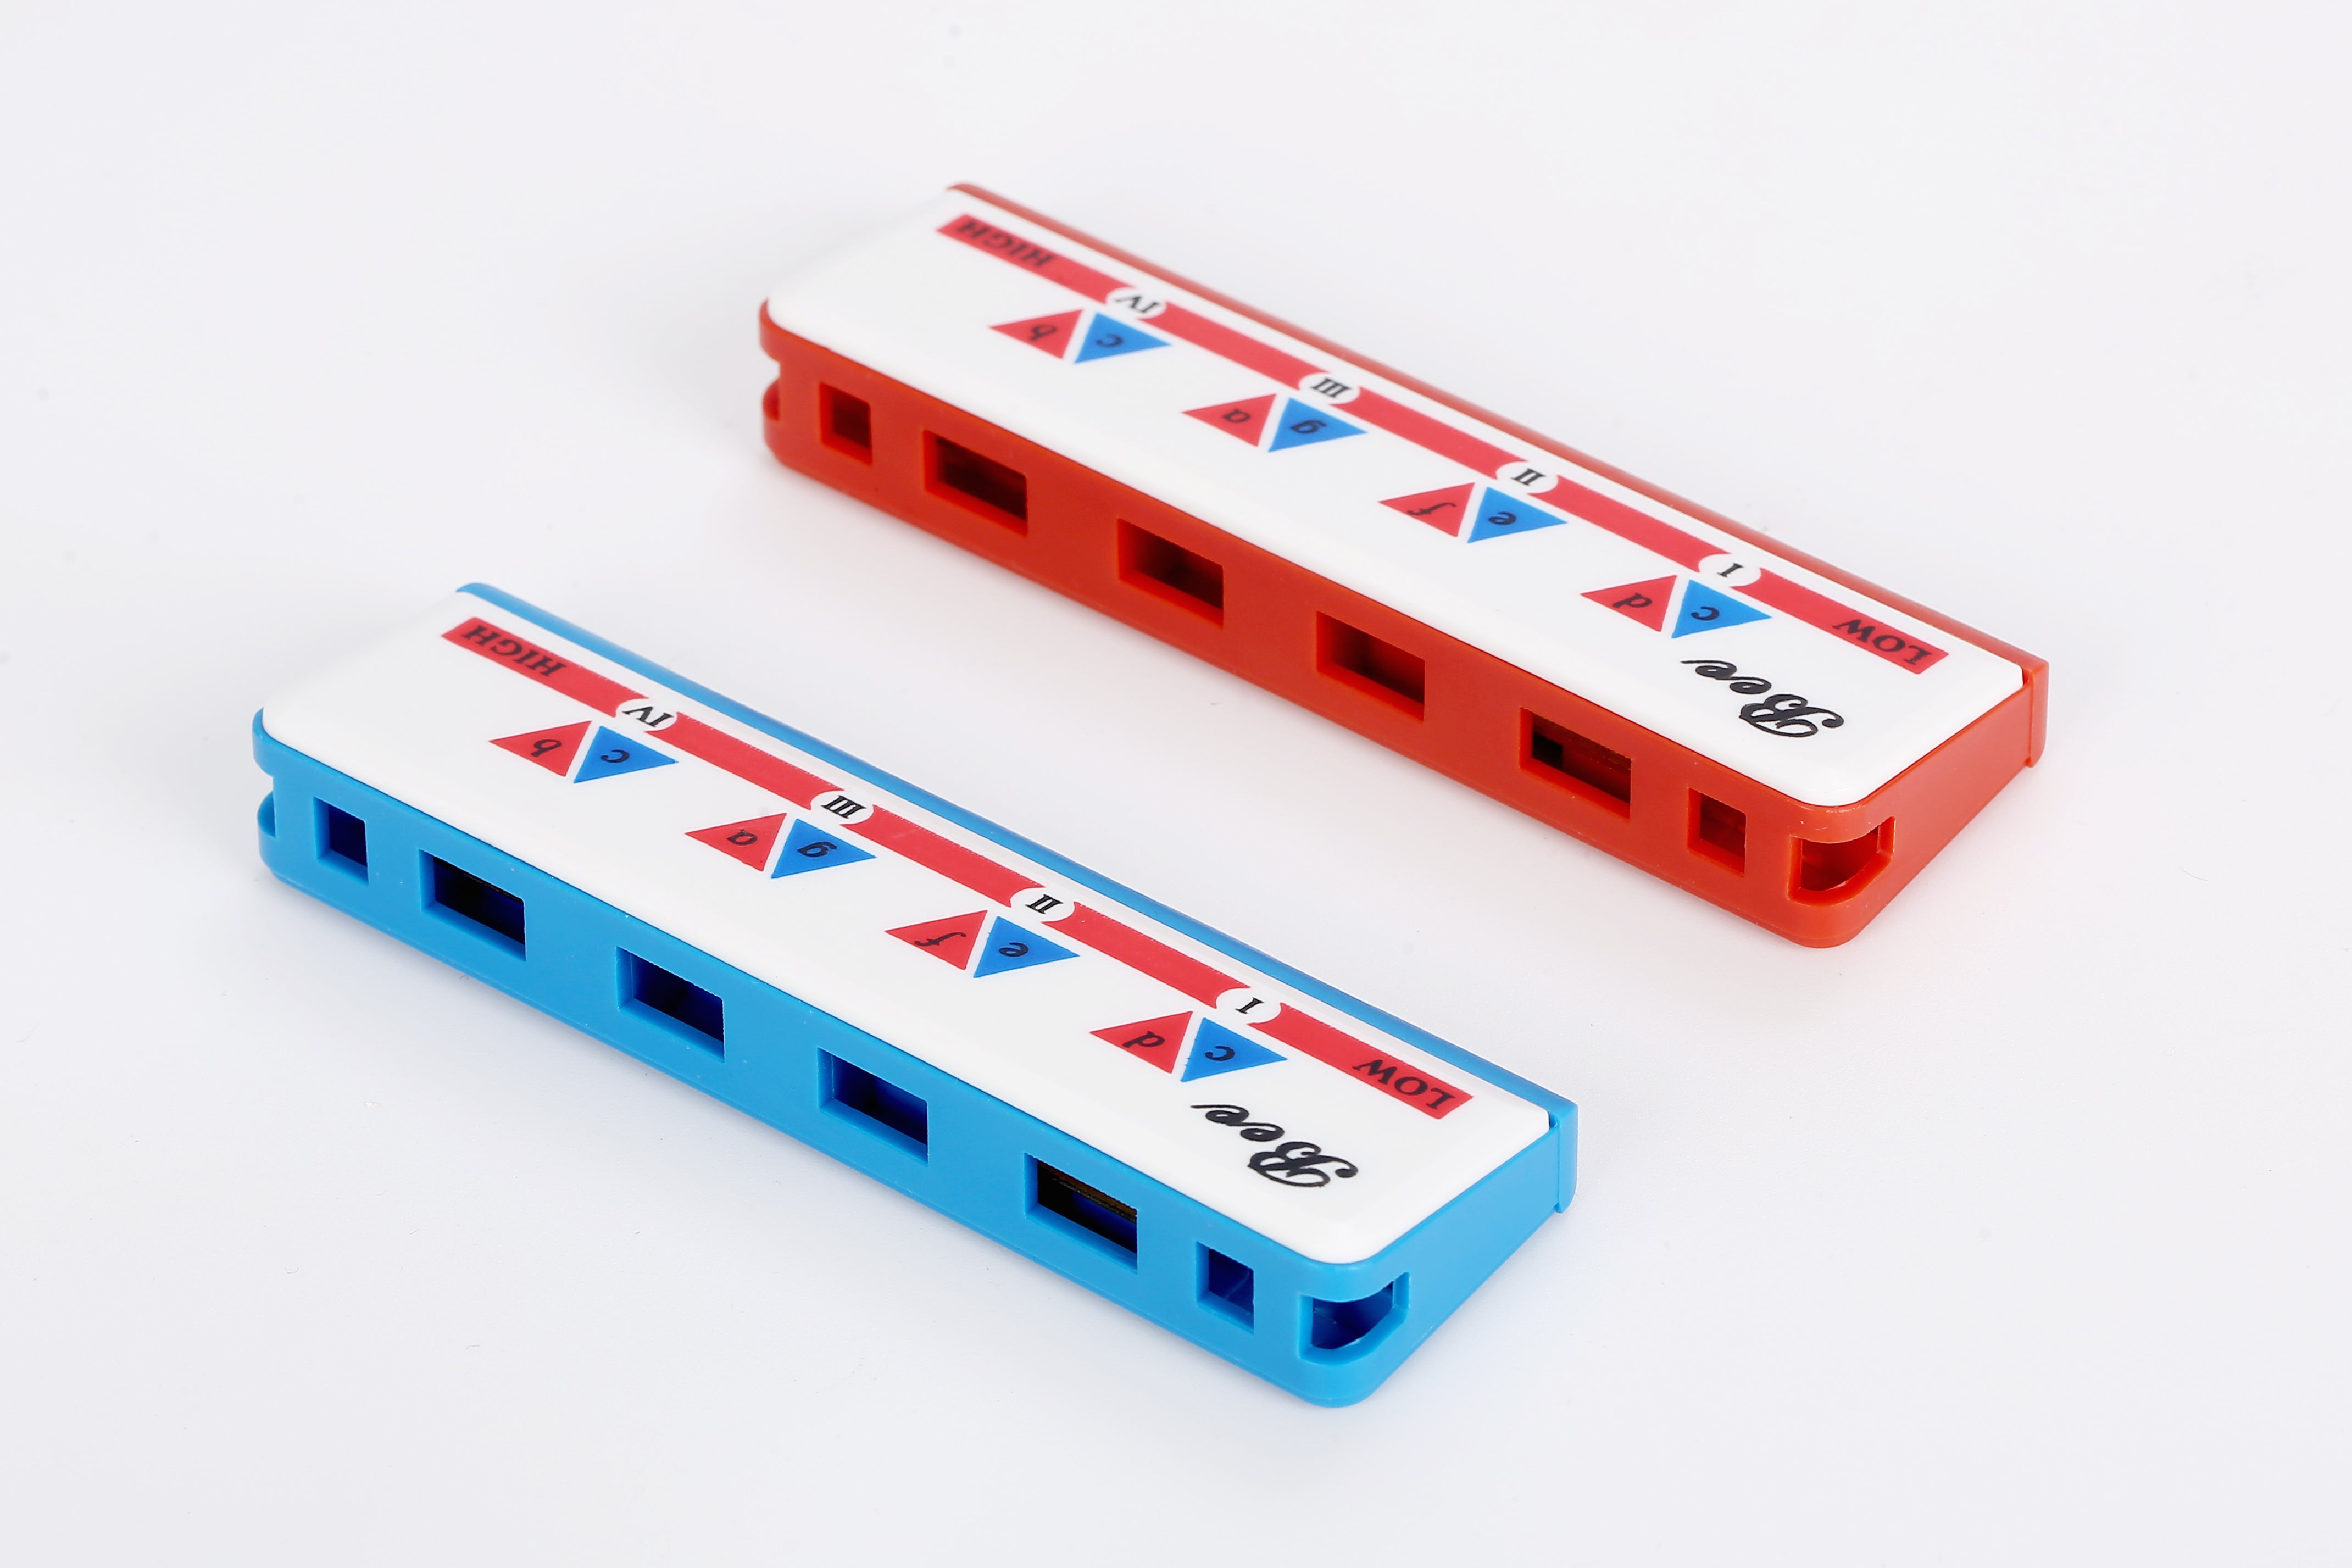 Bee 4 holes 8 tones plastic harmonica One piece brass reed plate inside ABS plastic covers(DF4A) - Easttop harmonica